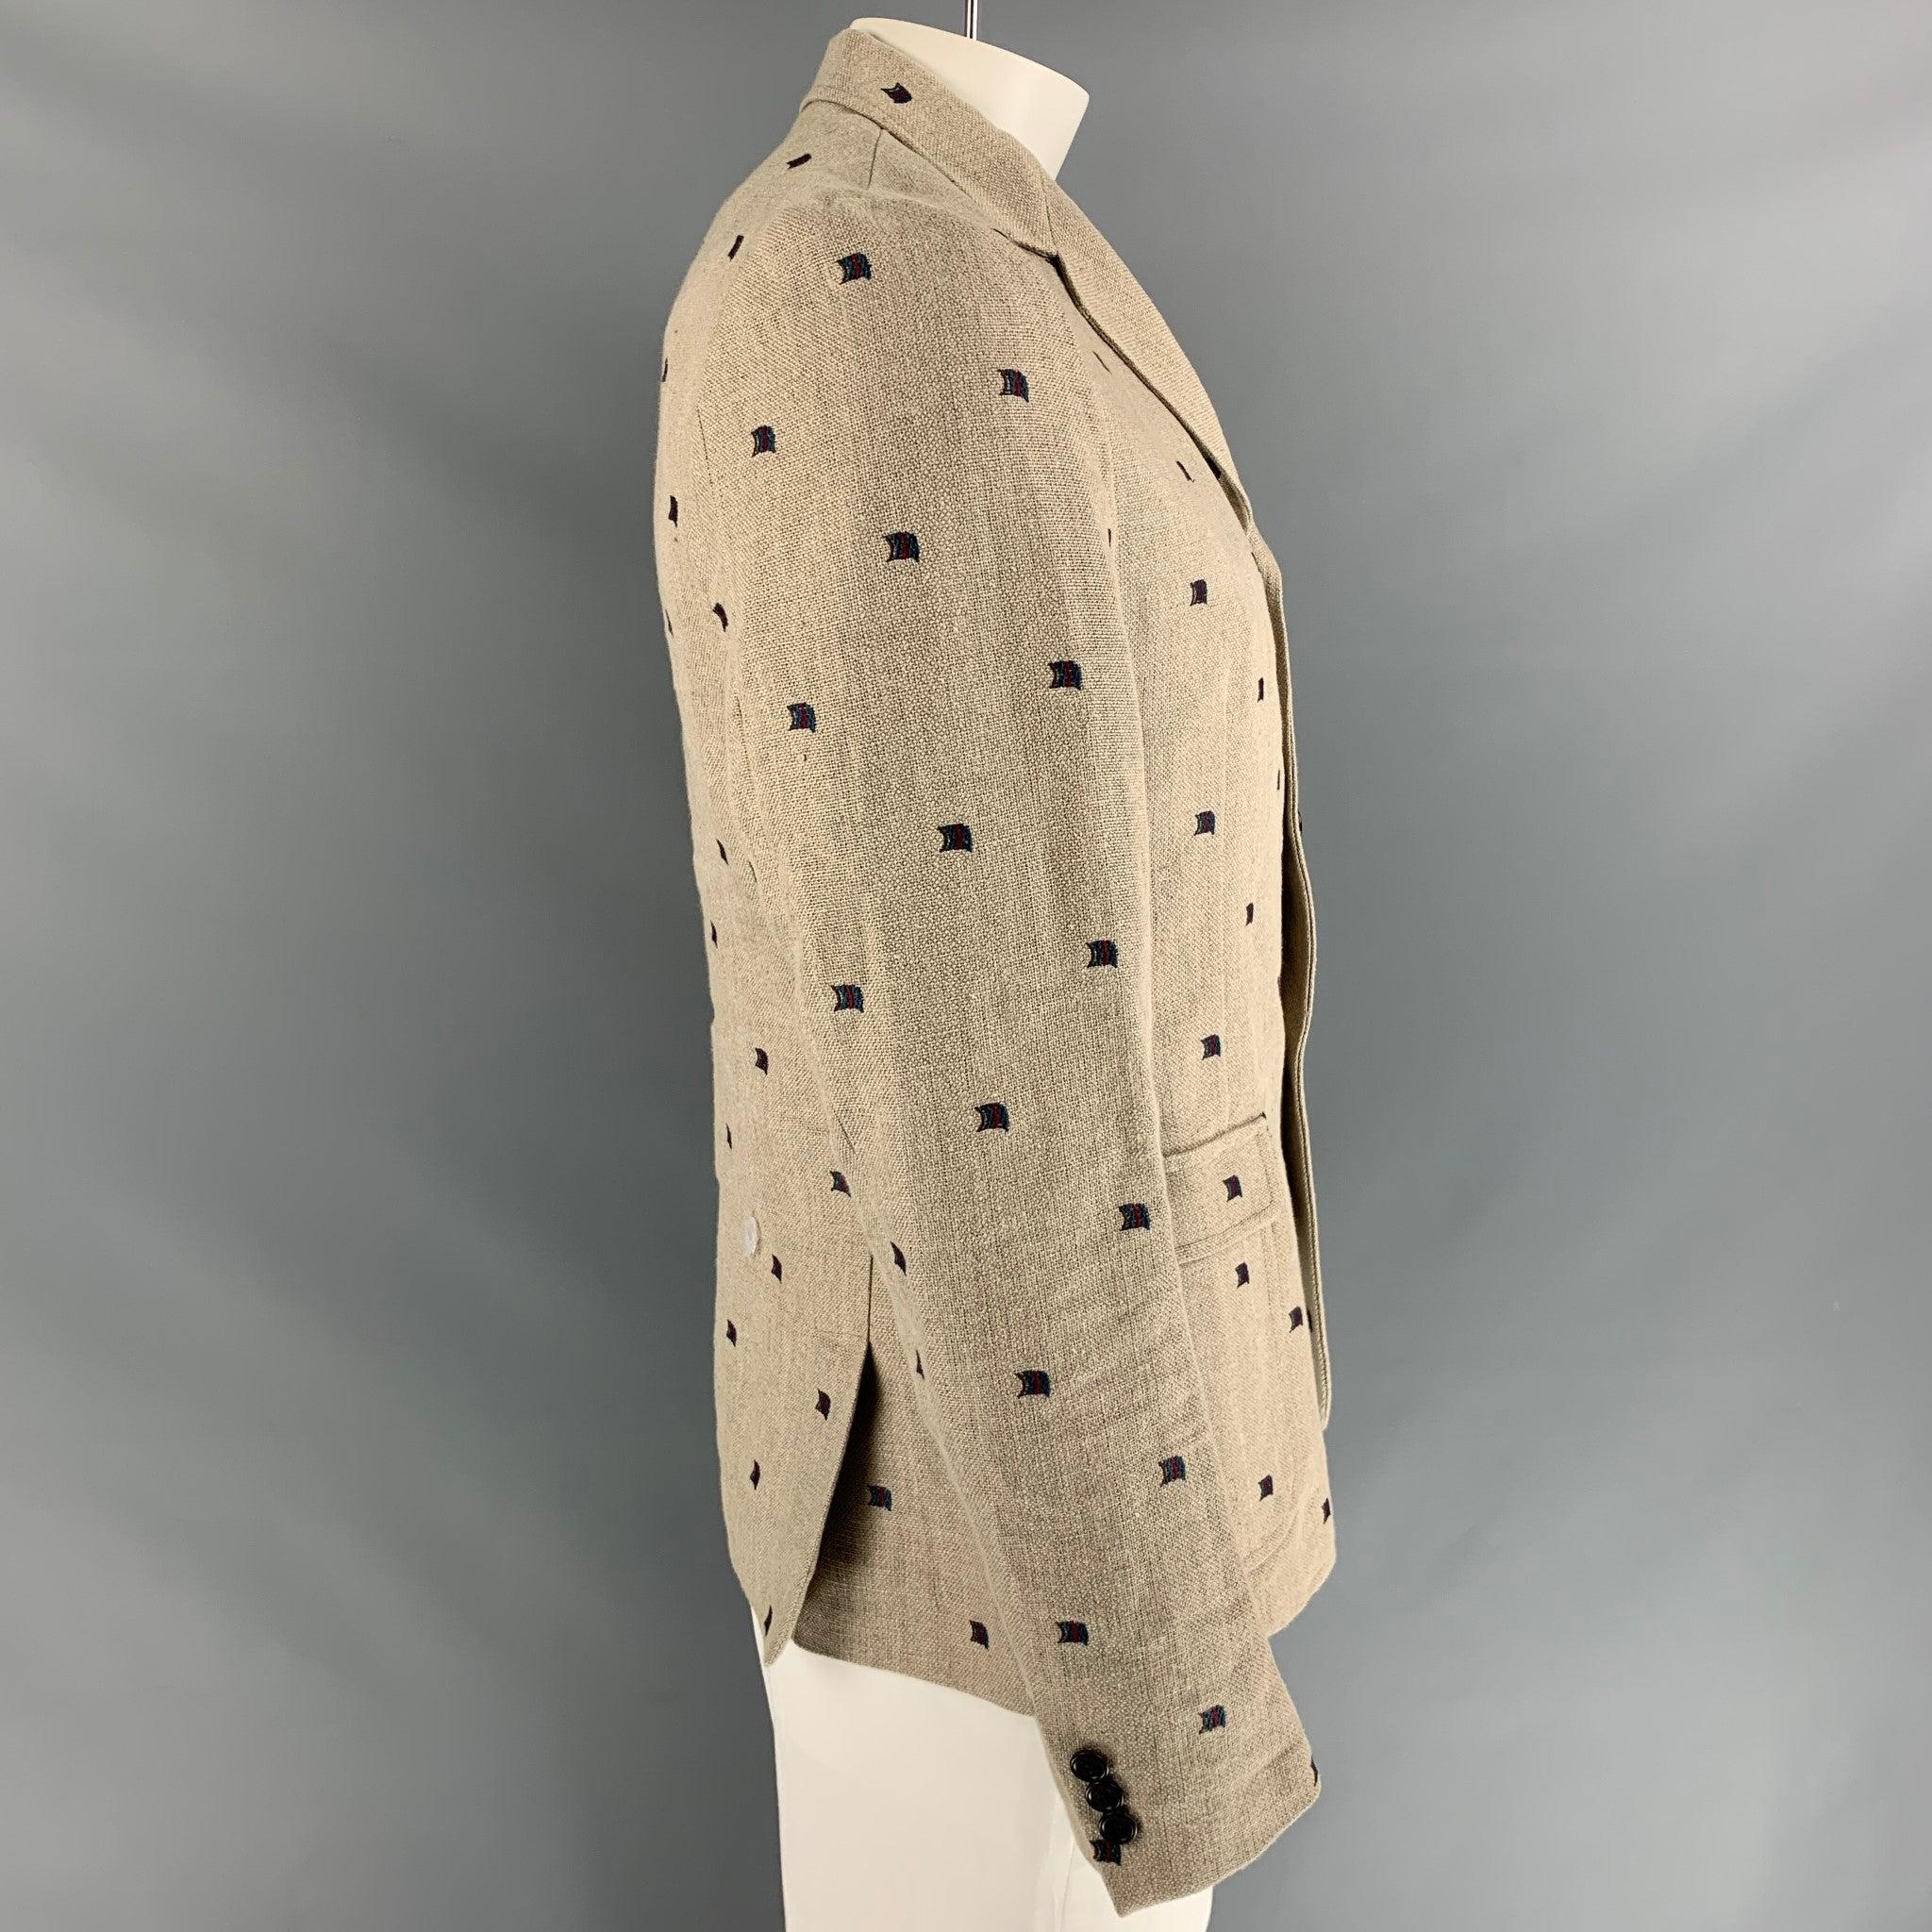 BAND OF OUTSIDERS sport coat comes in oatmeal and navy with flags print embroidery featuring a three button closure, straight no flap pockets, and notch lapel. Made in Italy.Excellent Pre-Owned Condition.
  

Marked:   3 

Measurements: 
 
Shoulder: